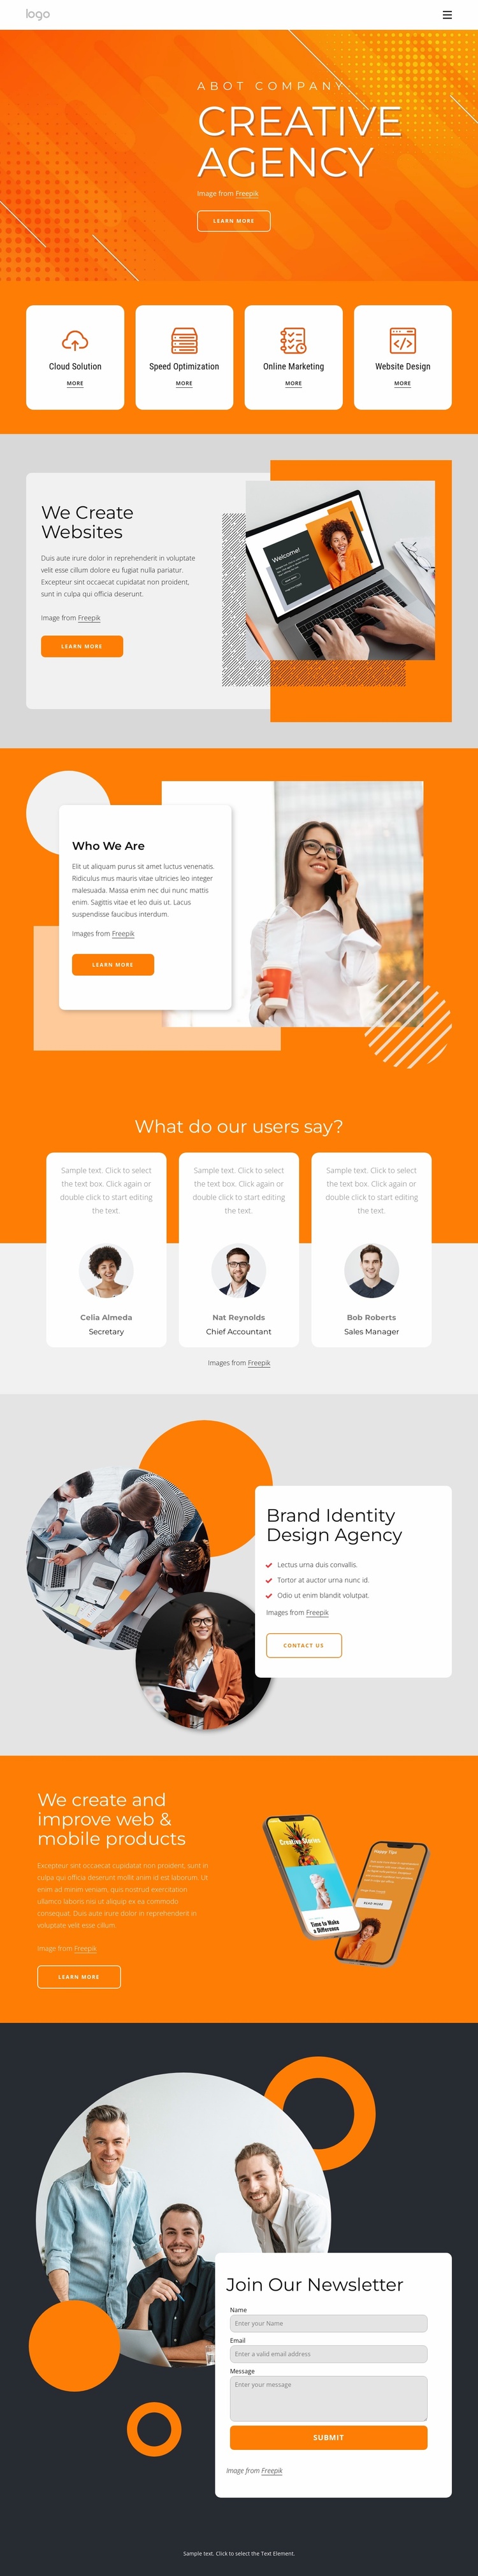 The creative agency for your next big thing Landing Page